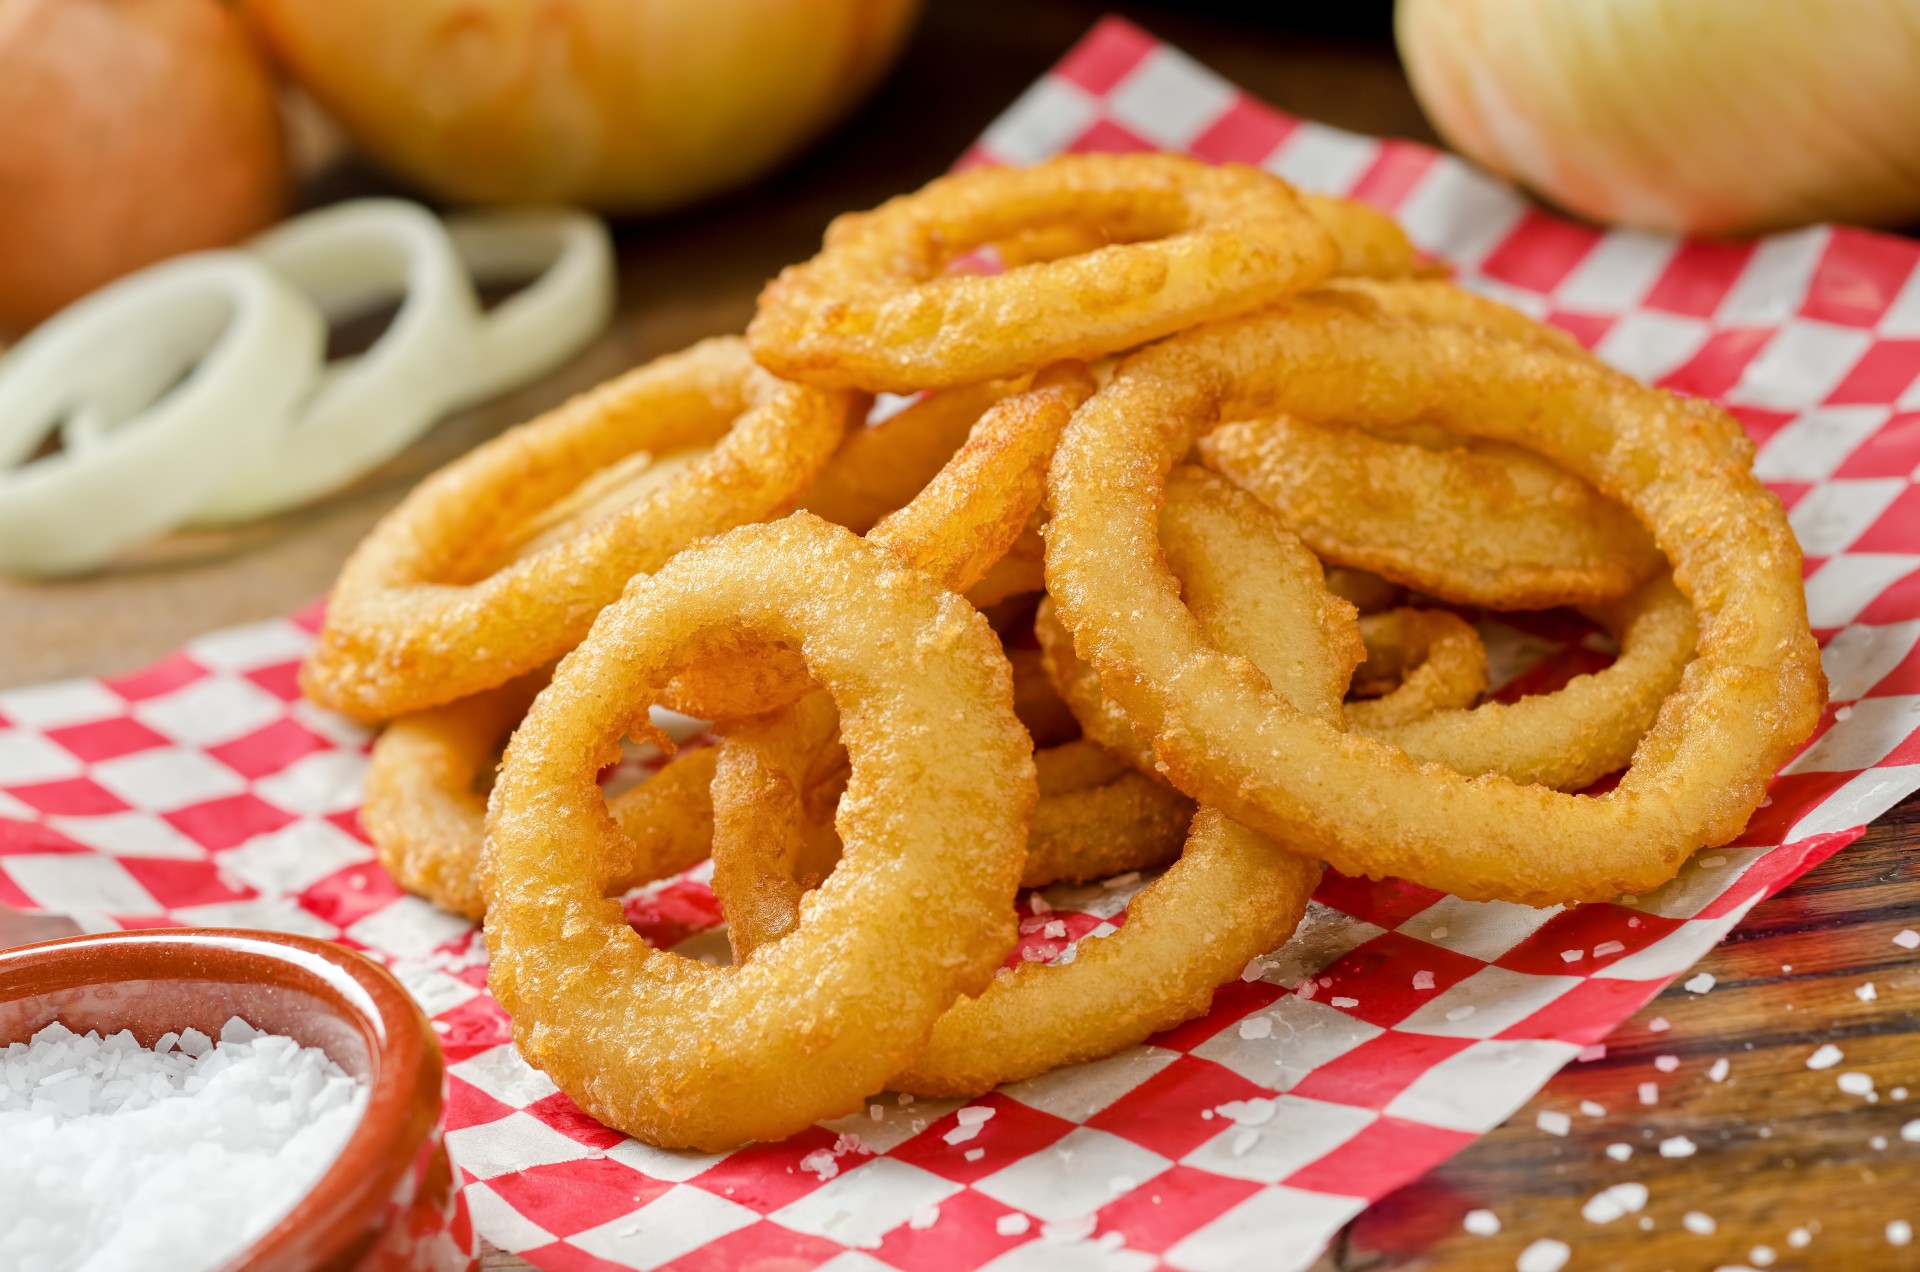 Recipe for a&w onion rings